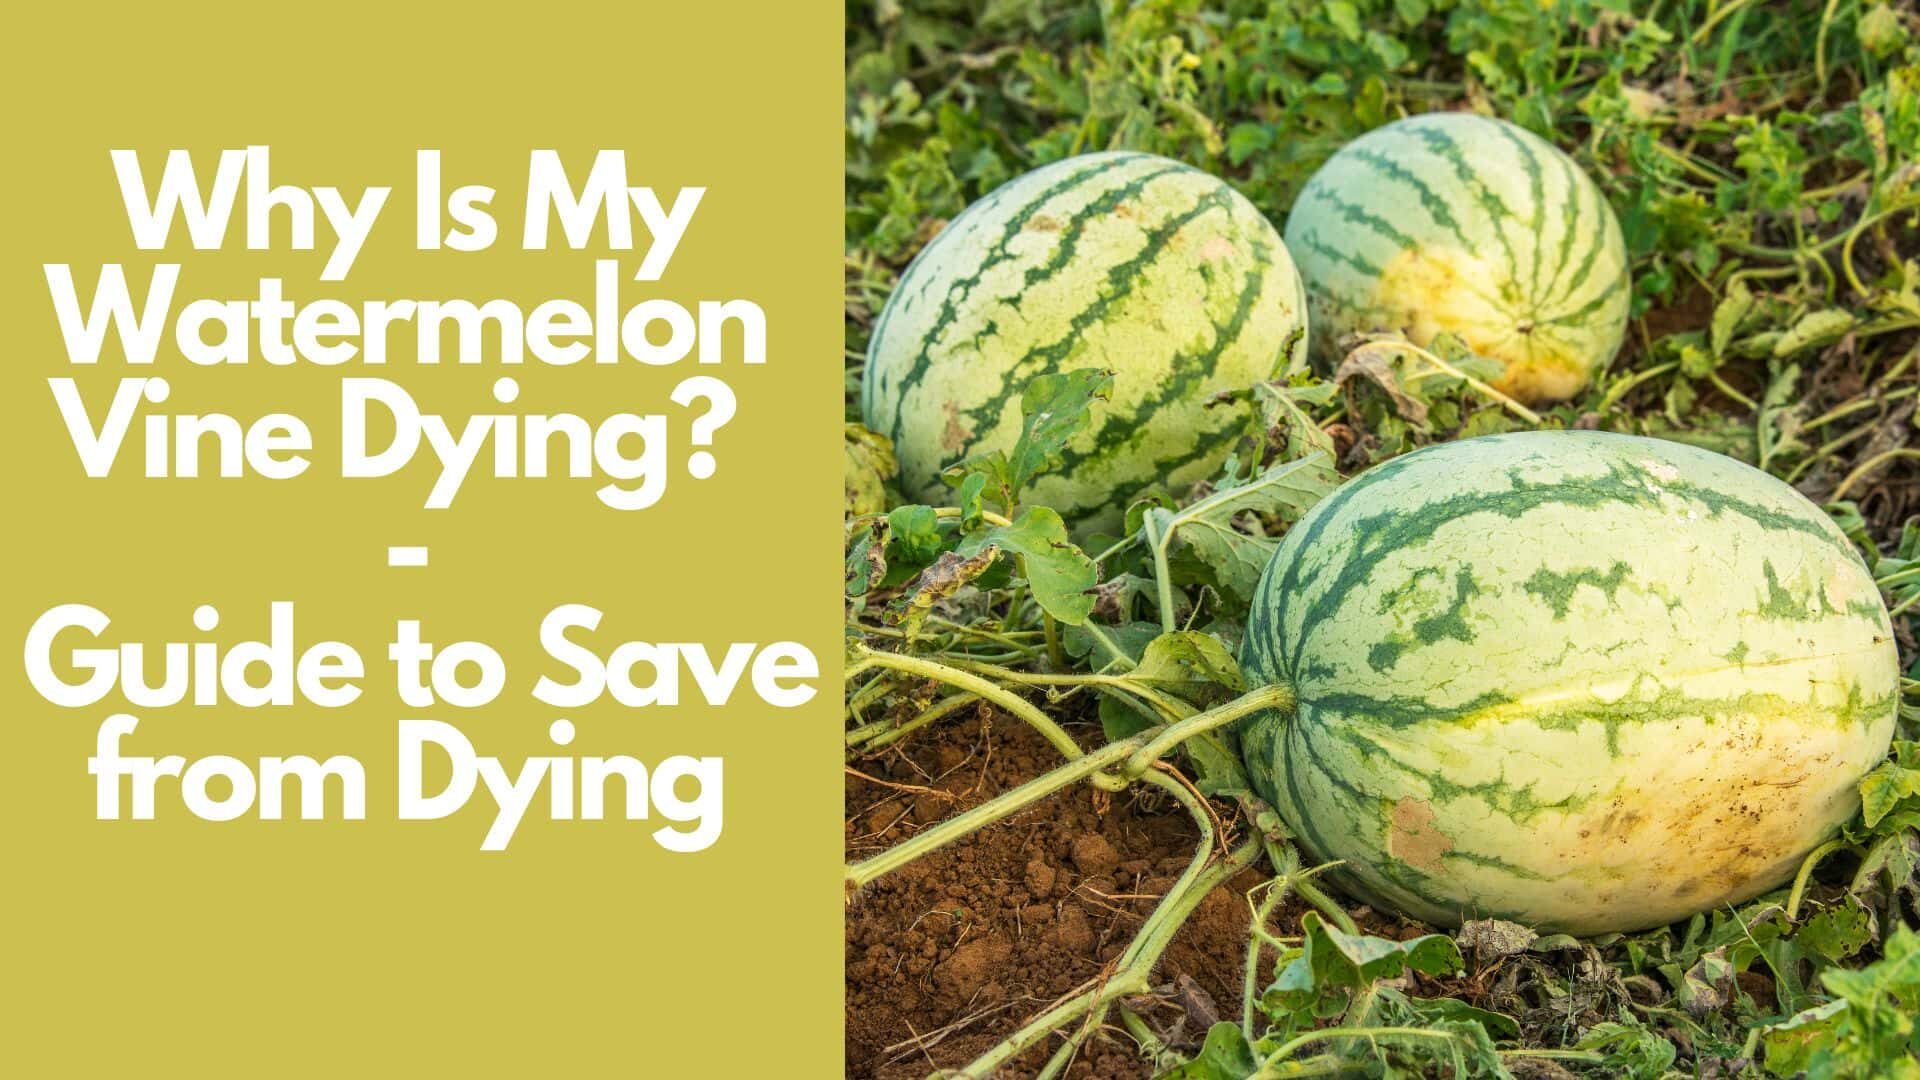 Why Is My Watermelon Vine Dying? : Guide to Save from Dying 